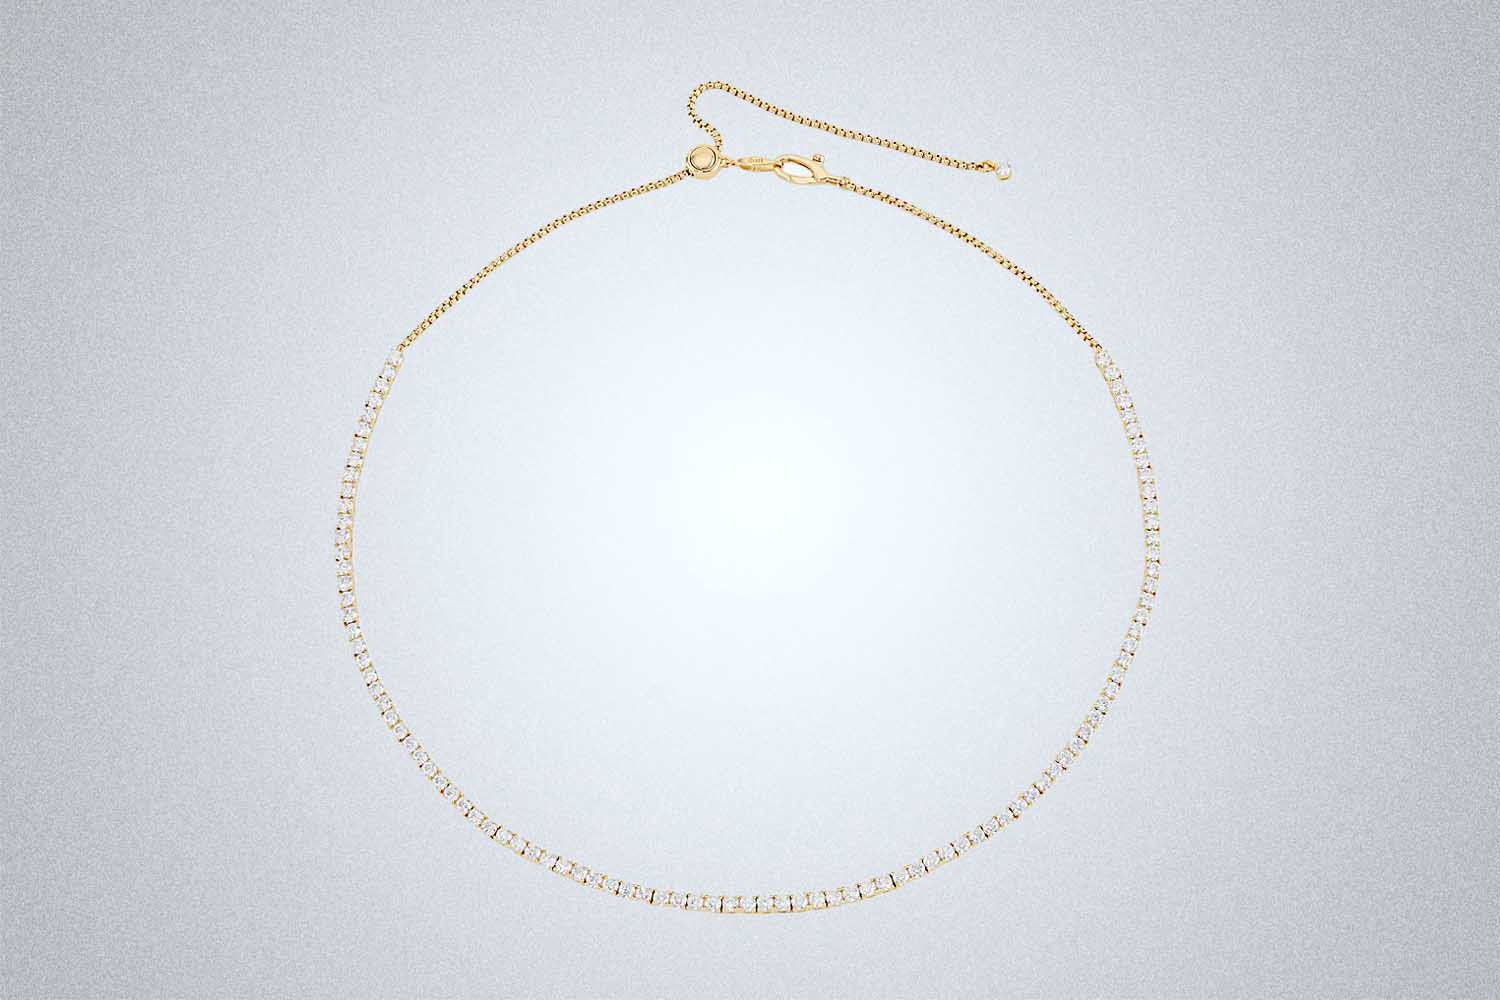 Adriana Orsini Loveall 18K-Gold-Plated & Cubic Zirconia Tennis Necklace, now on sale